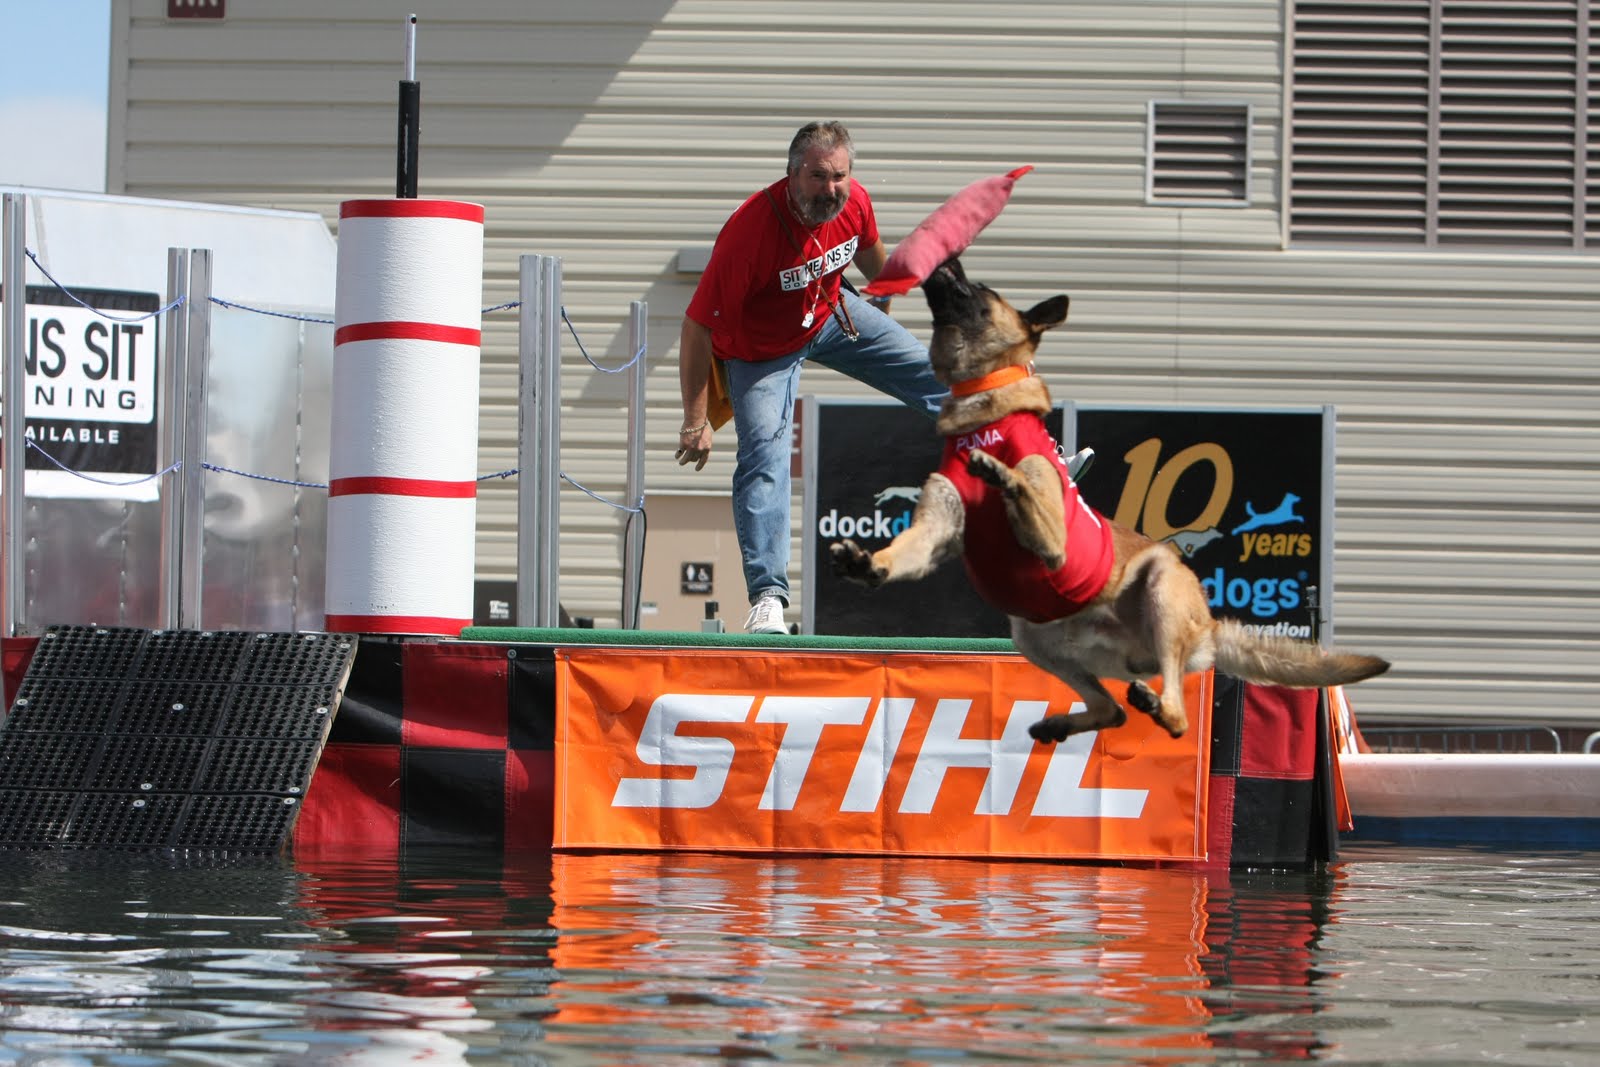 Las Vegas DockDogs Blog PUMA'S RESULTS FROM DOGS & LOGS WORLD